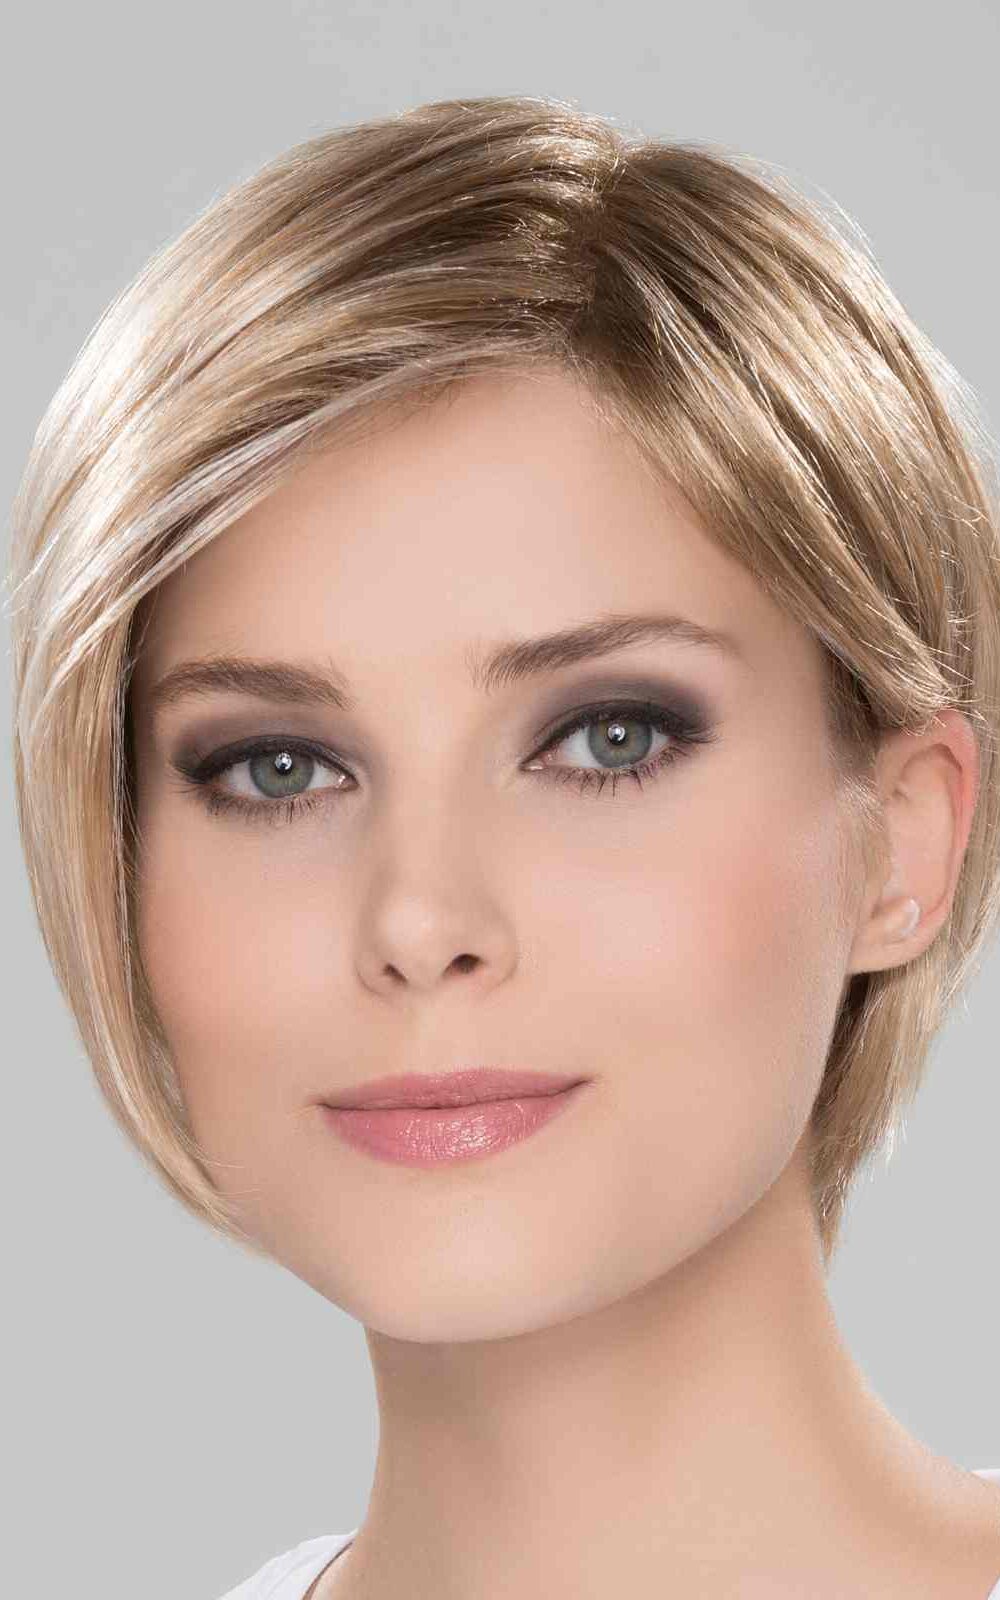 Amy Deluxe | Synthetic Lace Front Wig (100% Hand-Tied) by Ellen Wille | Light Caramel Rooted | Elly-K.com.au